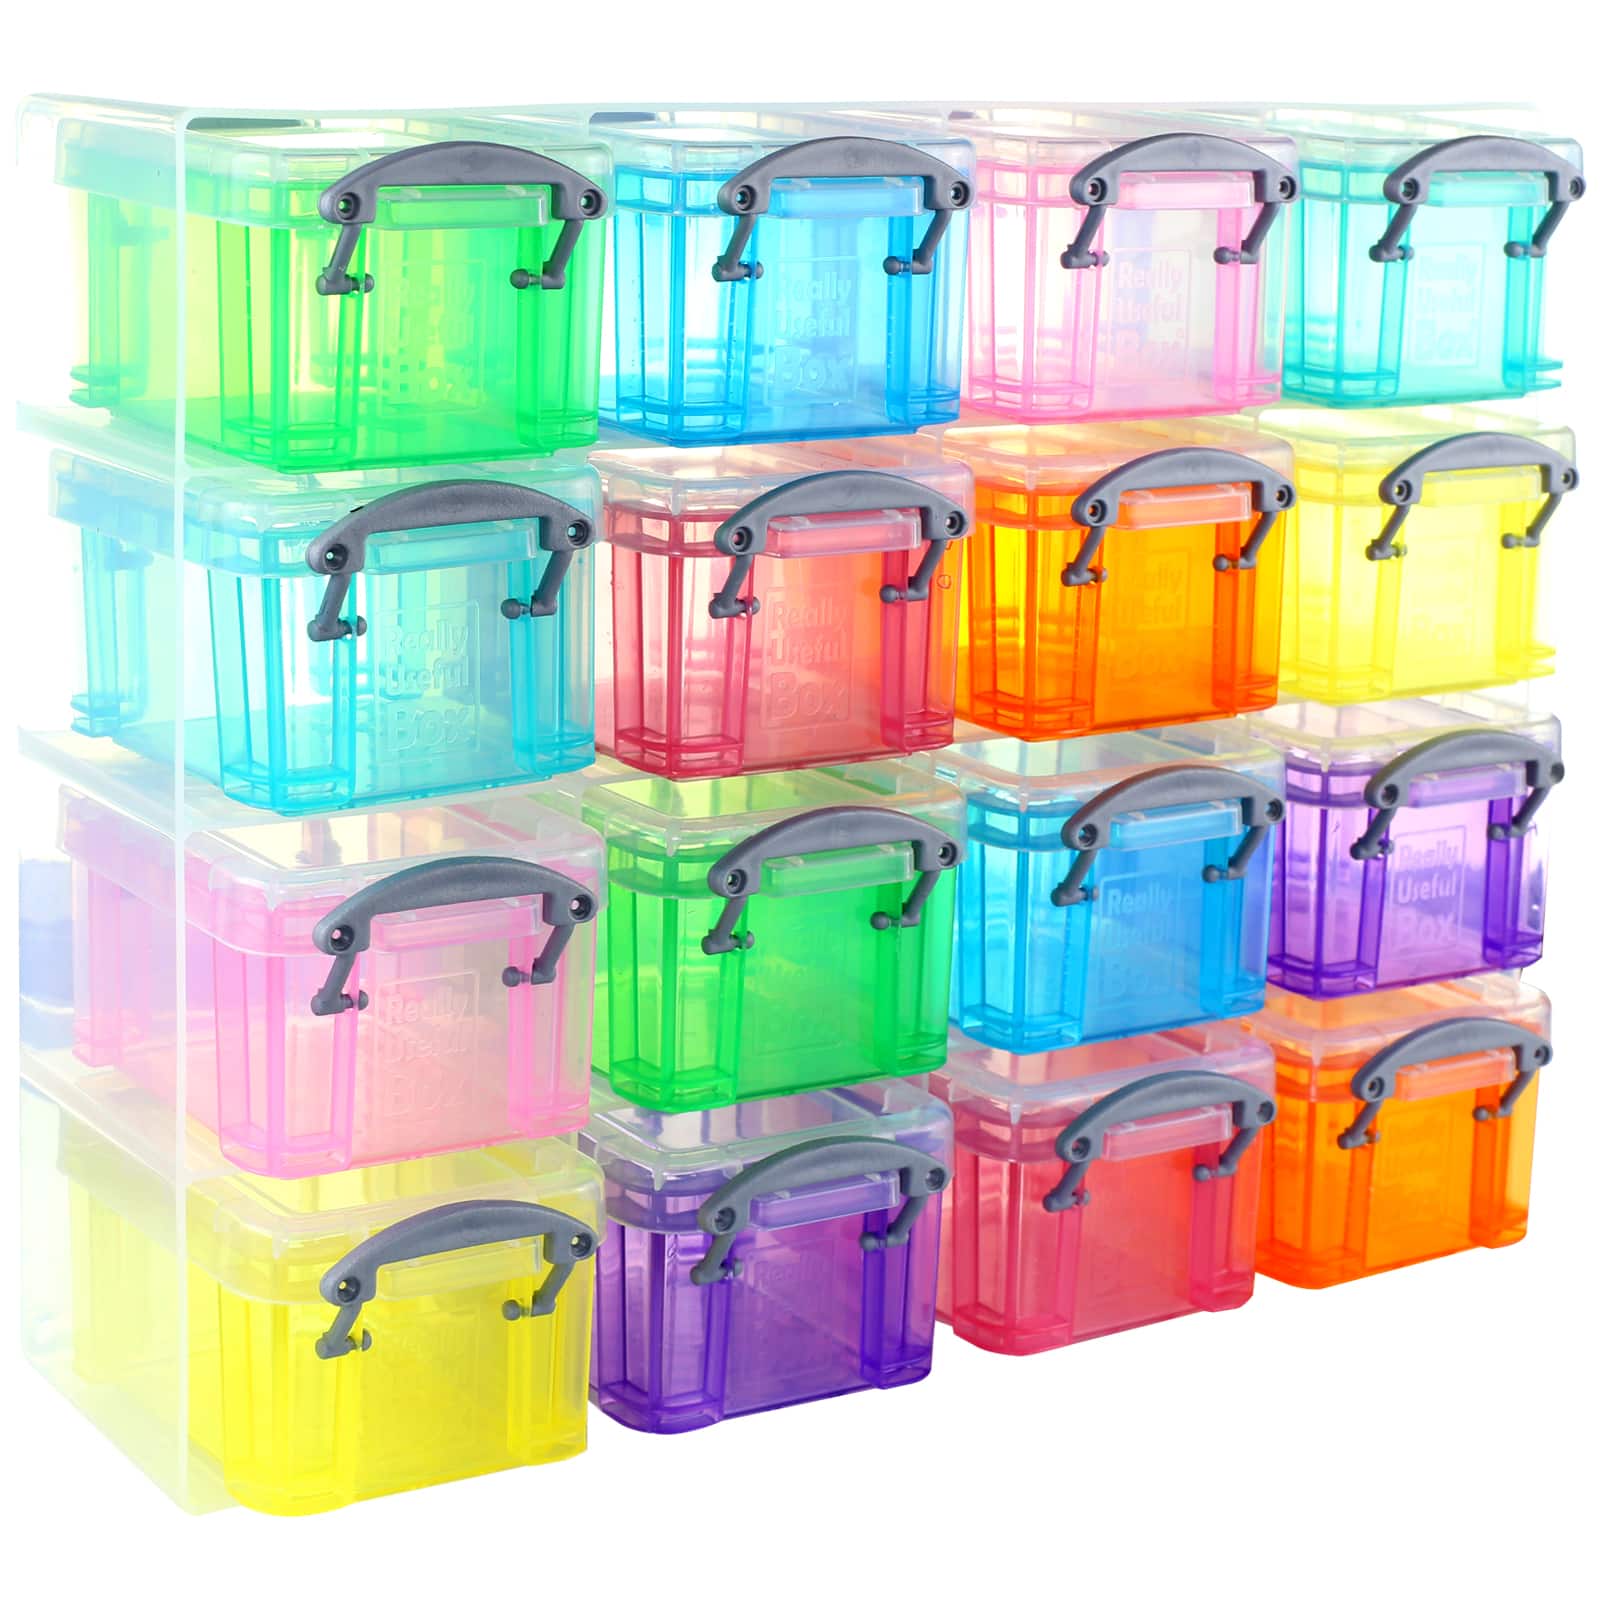 Find the Really Useful Boxes® 16Box Organizer at Michaels